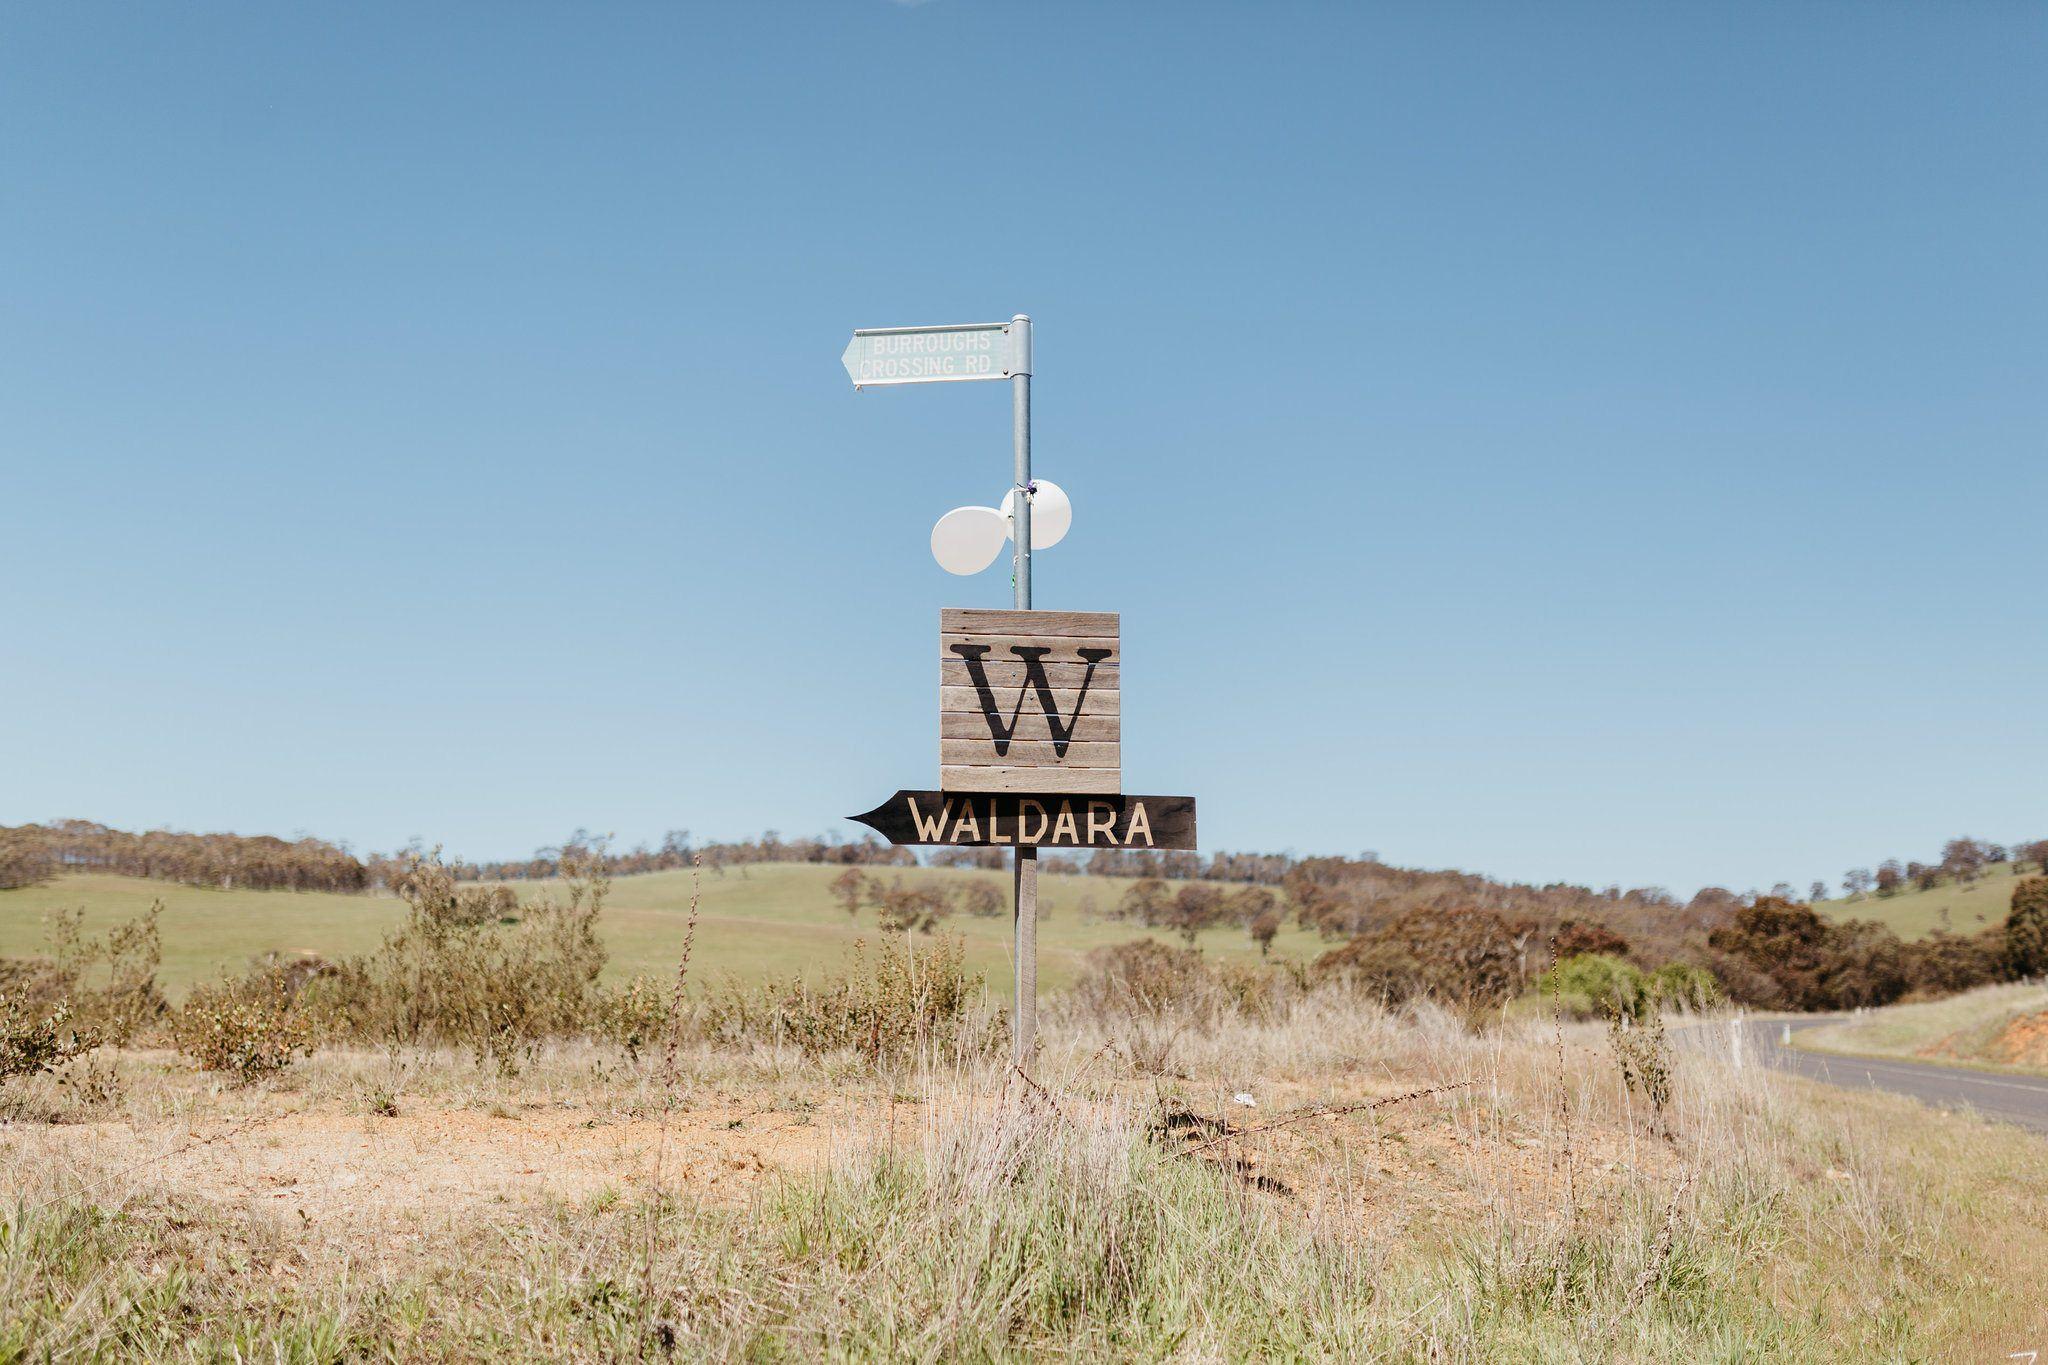 NSW country wedding venues